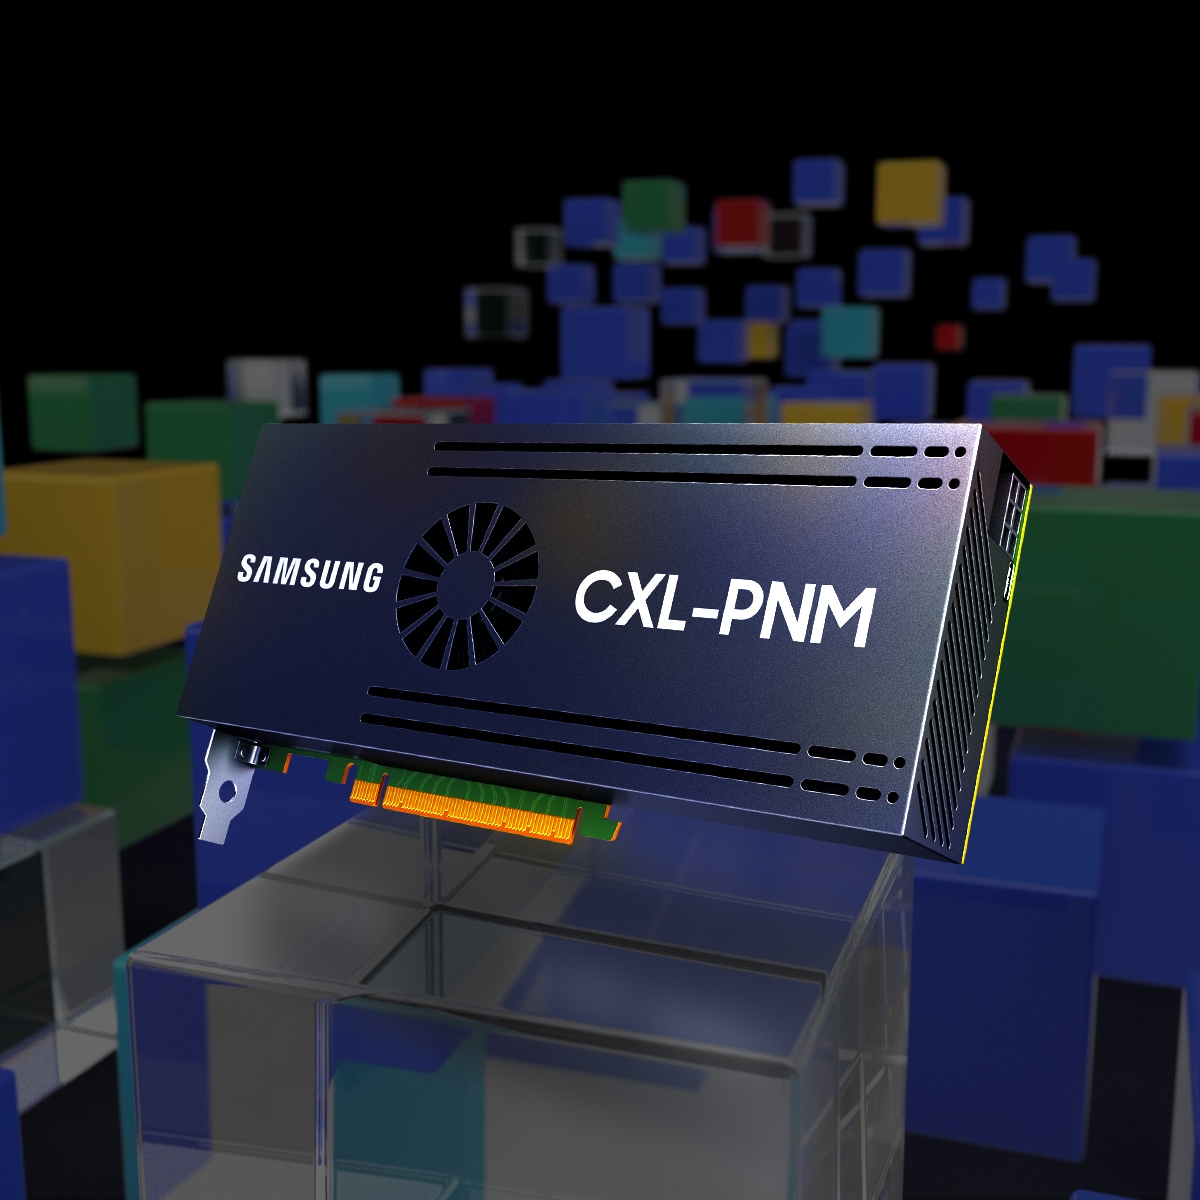 This is the CXL-PNM, one of the Samsung Semiconductor products introduced at Memcon 2023.